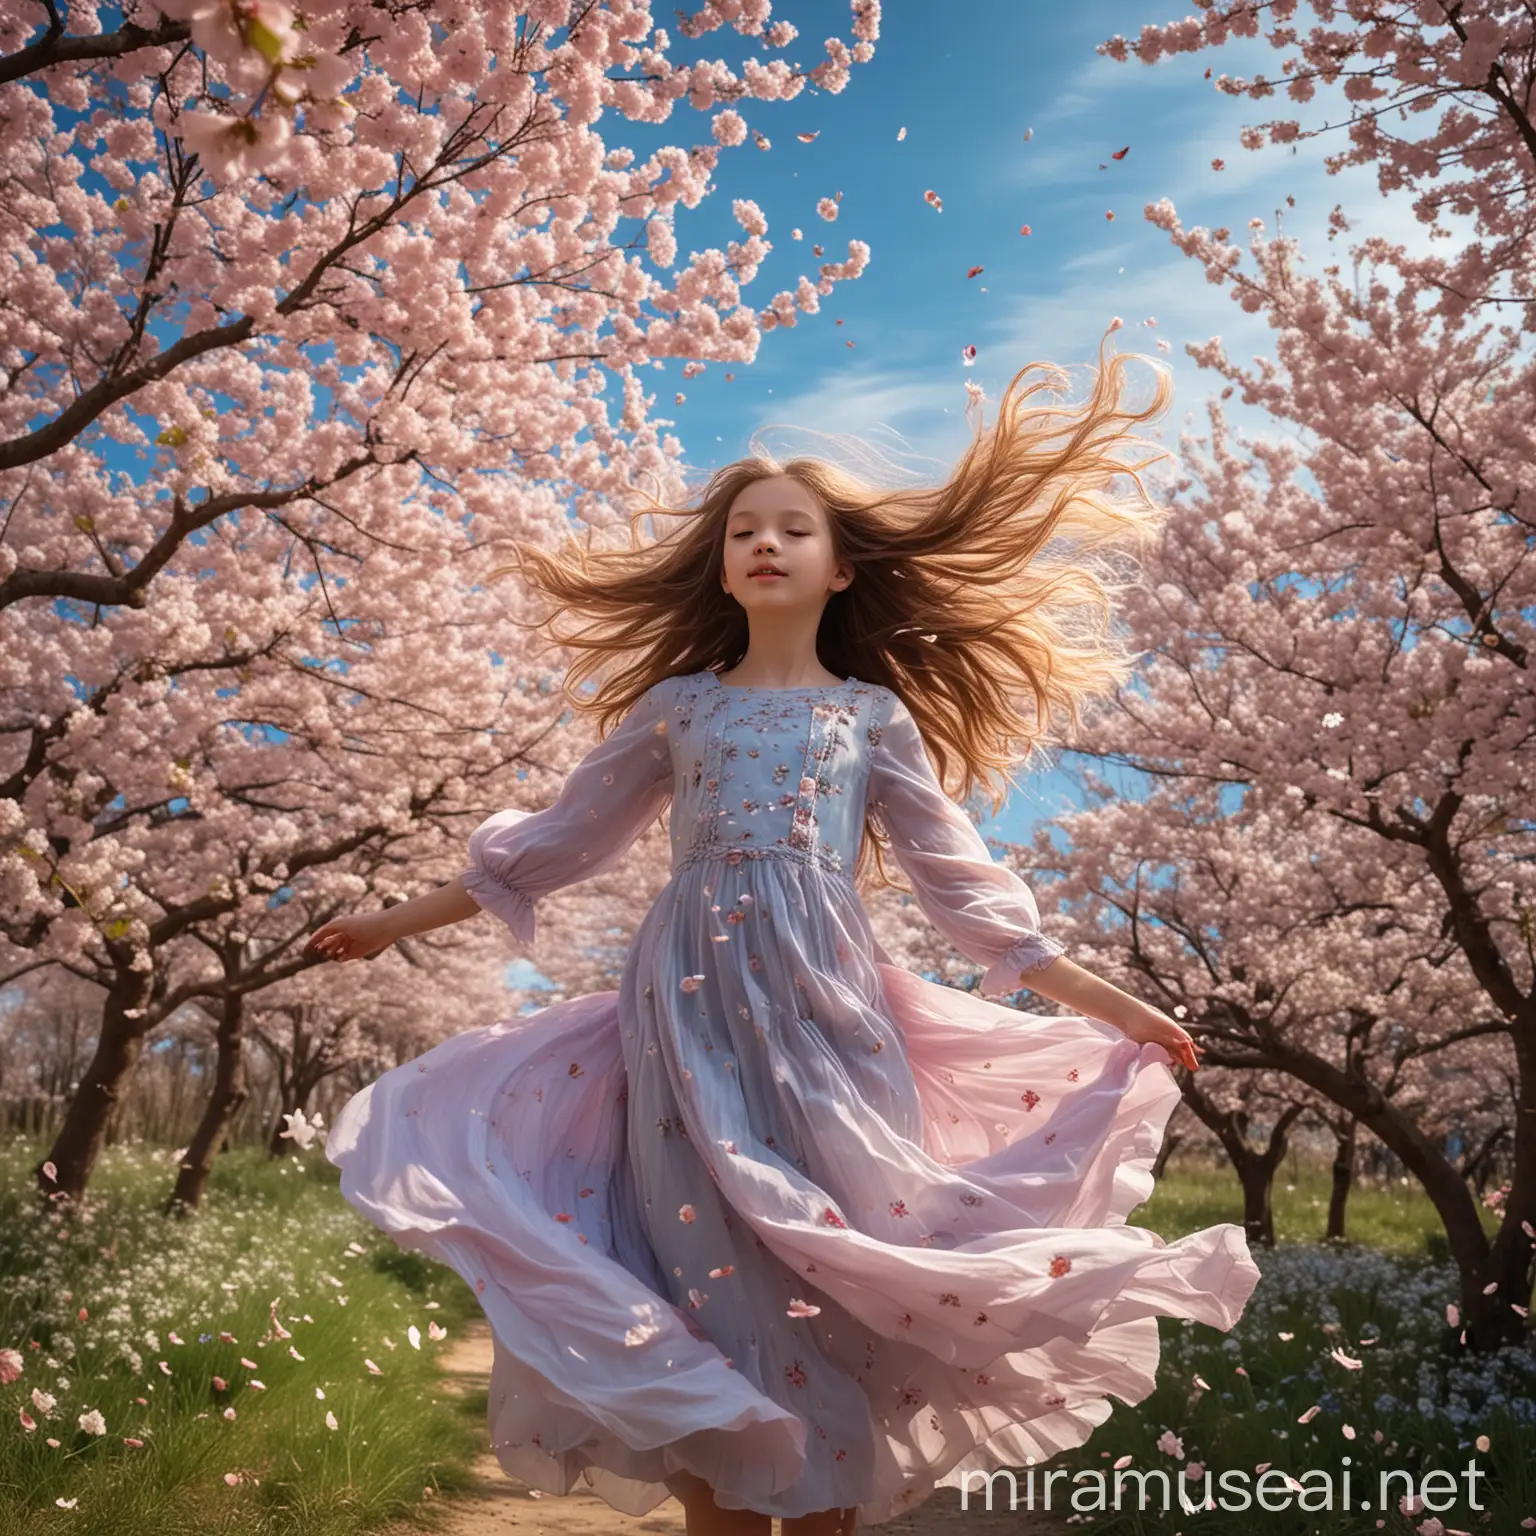 Young Girl Embracing Cherry Blossom Serenity